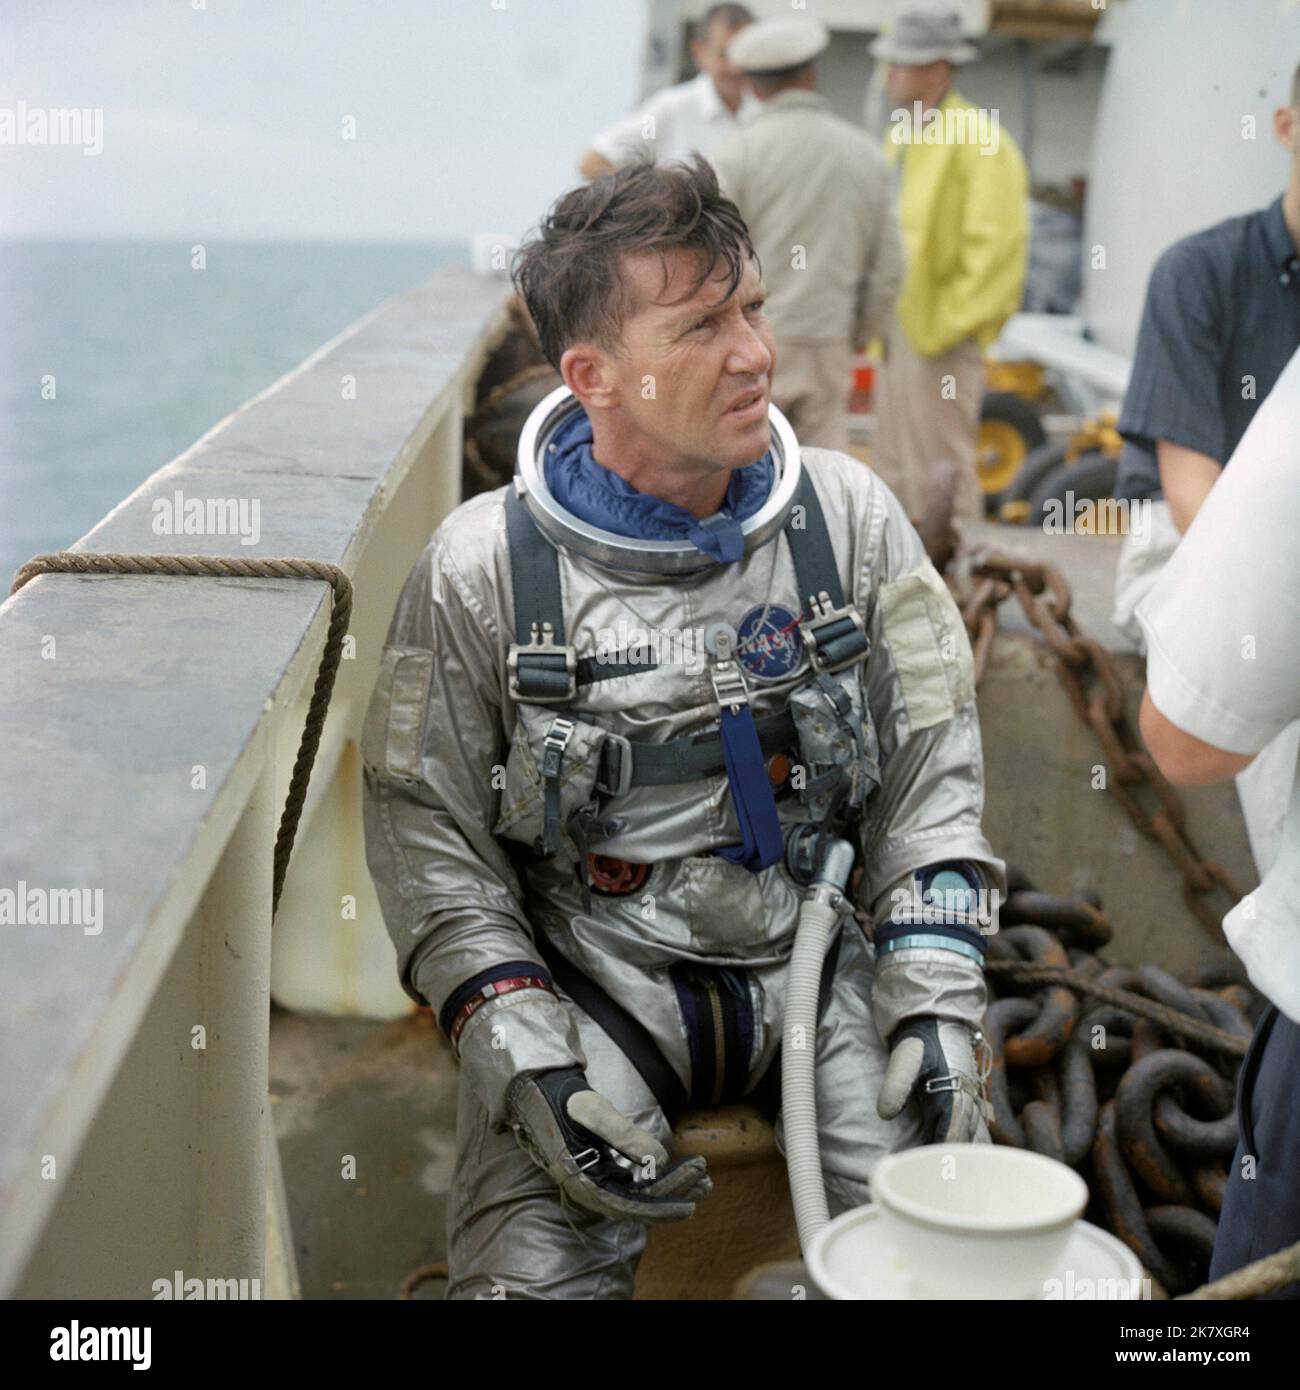 Astronaut Walter M. Schirra Jr., Gemini VI commander, suits up during water egress training aboard the NASA Motor Vessel Retriever in the Gulf of Mexico. This training prepared the astronauts for exiting the capsule after landing in the ocean. Stock Photo